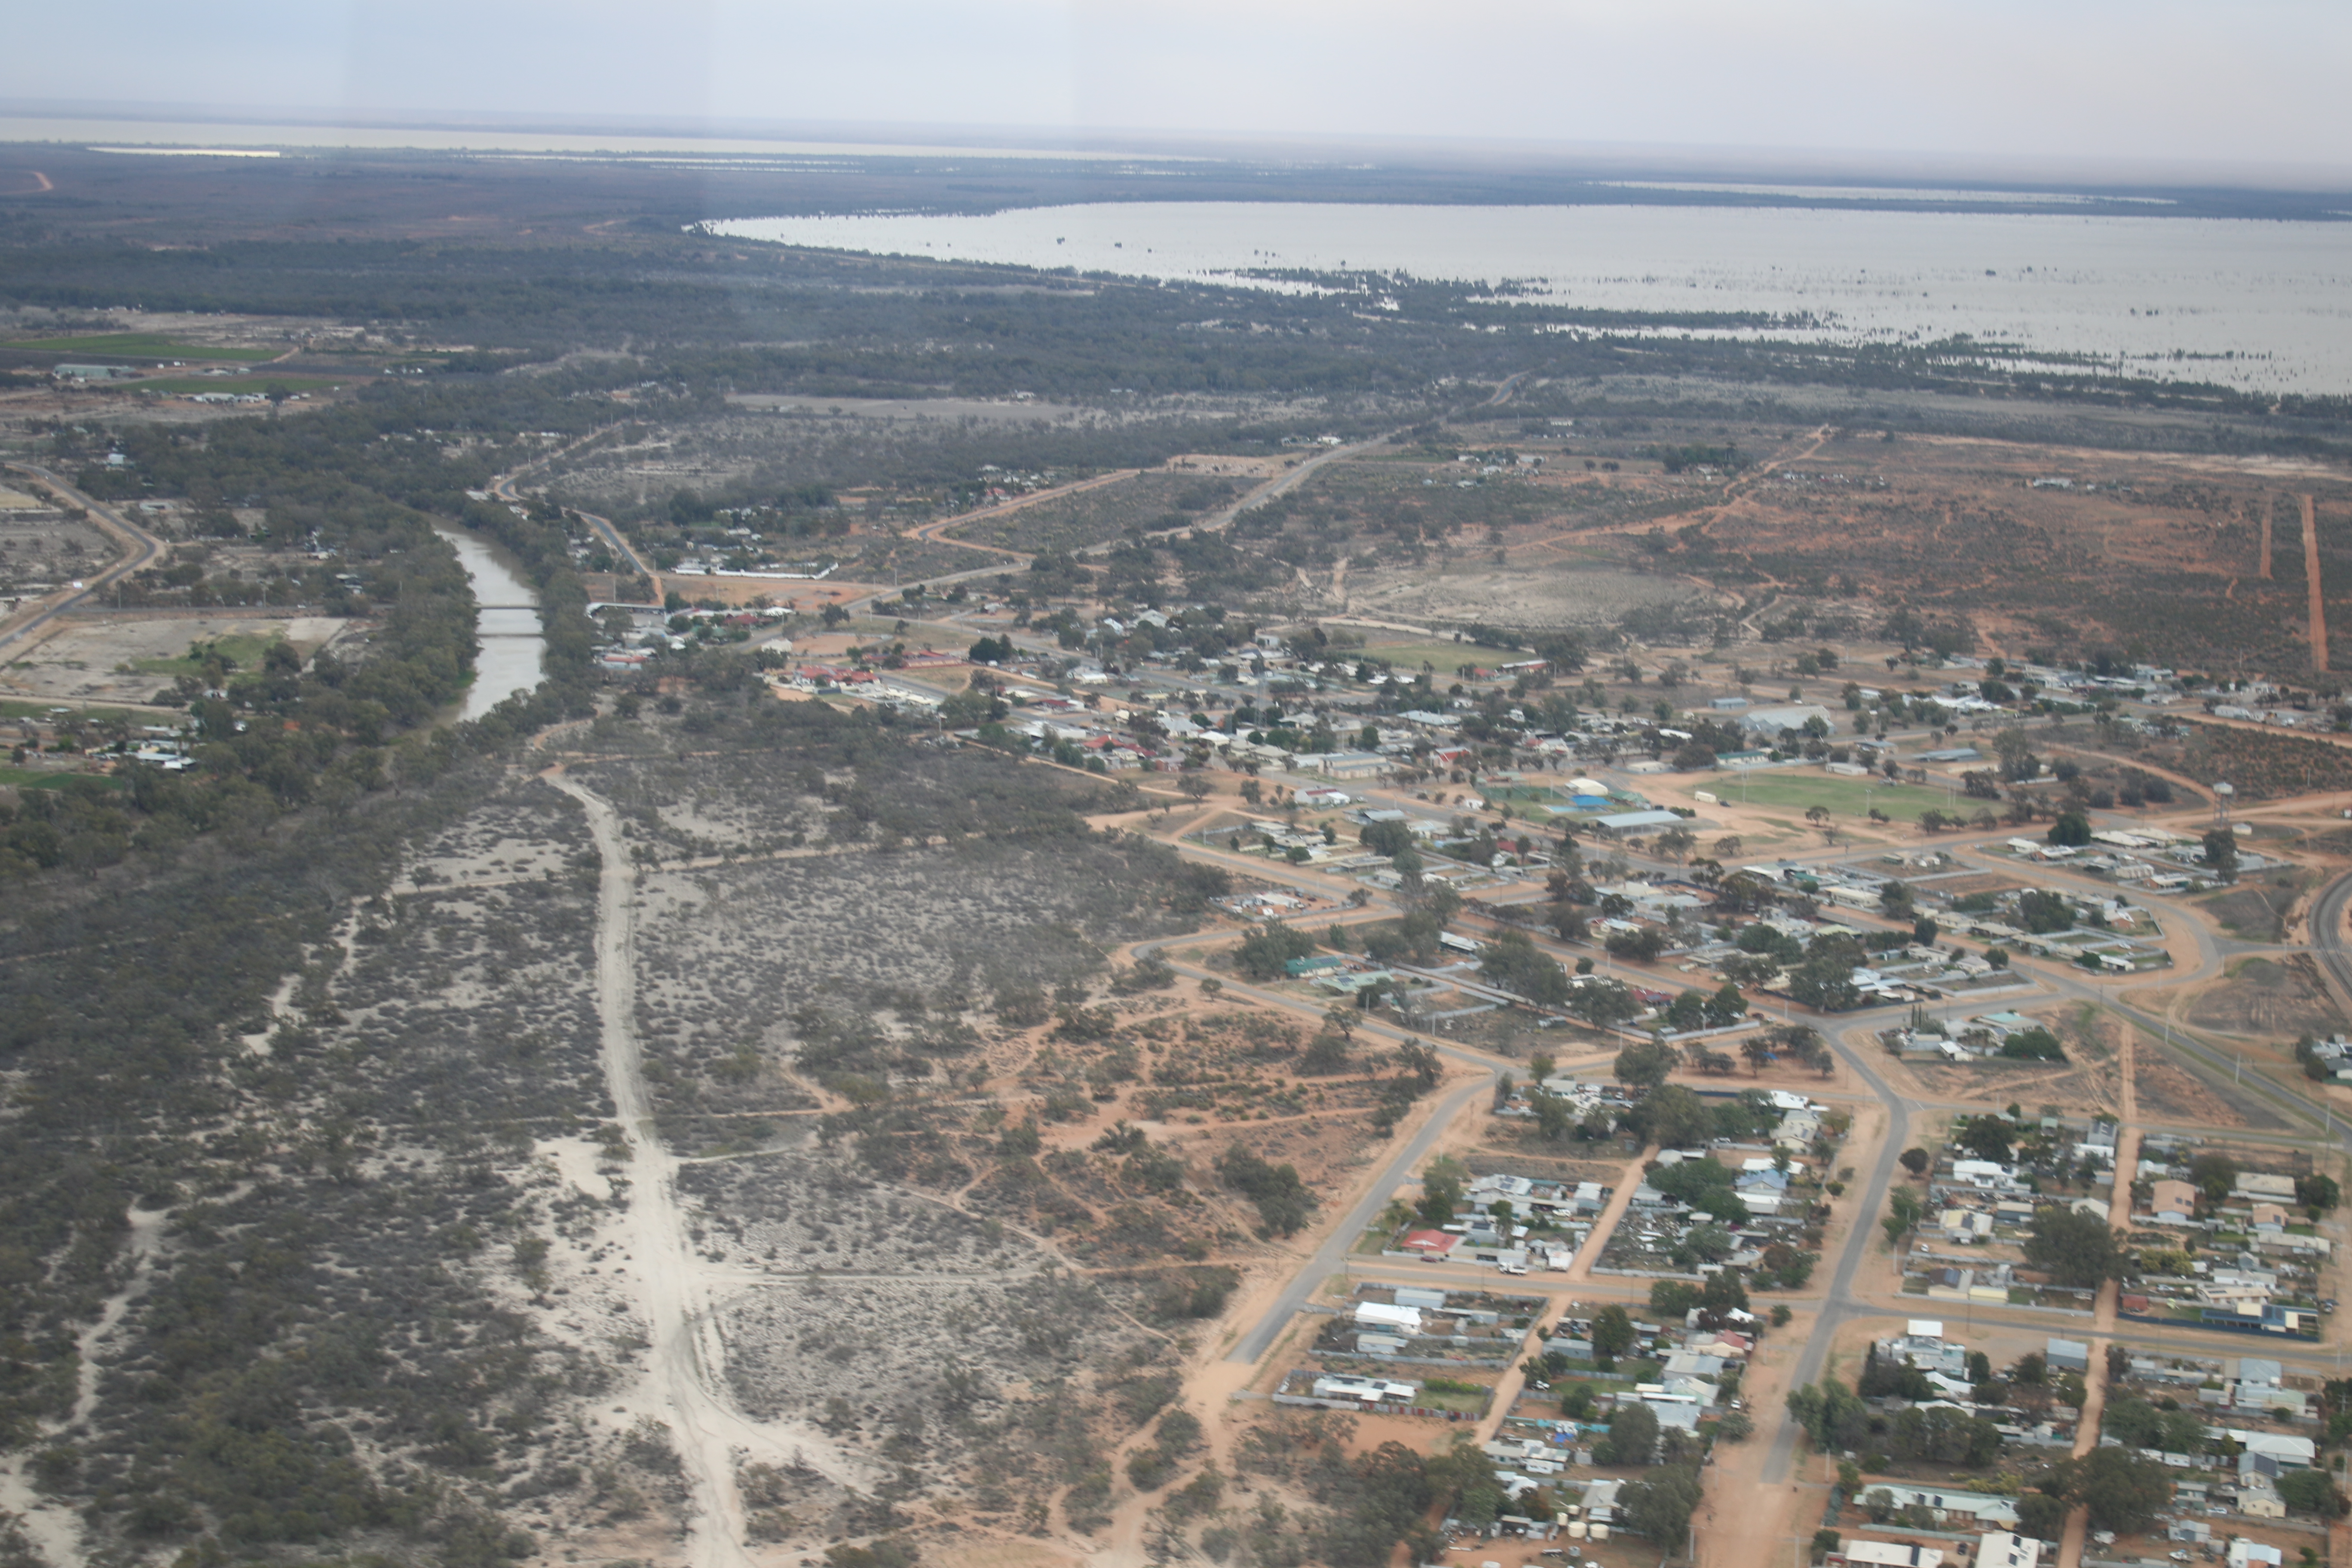 The Darling River with the town of Menindee